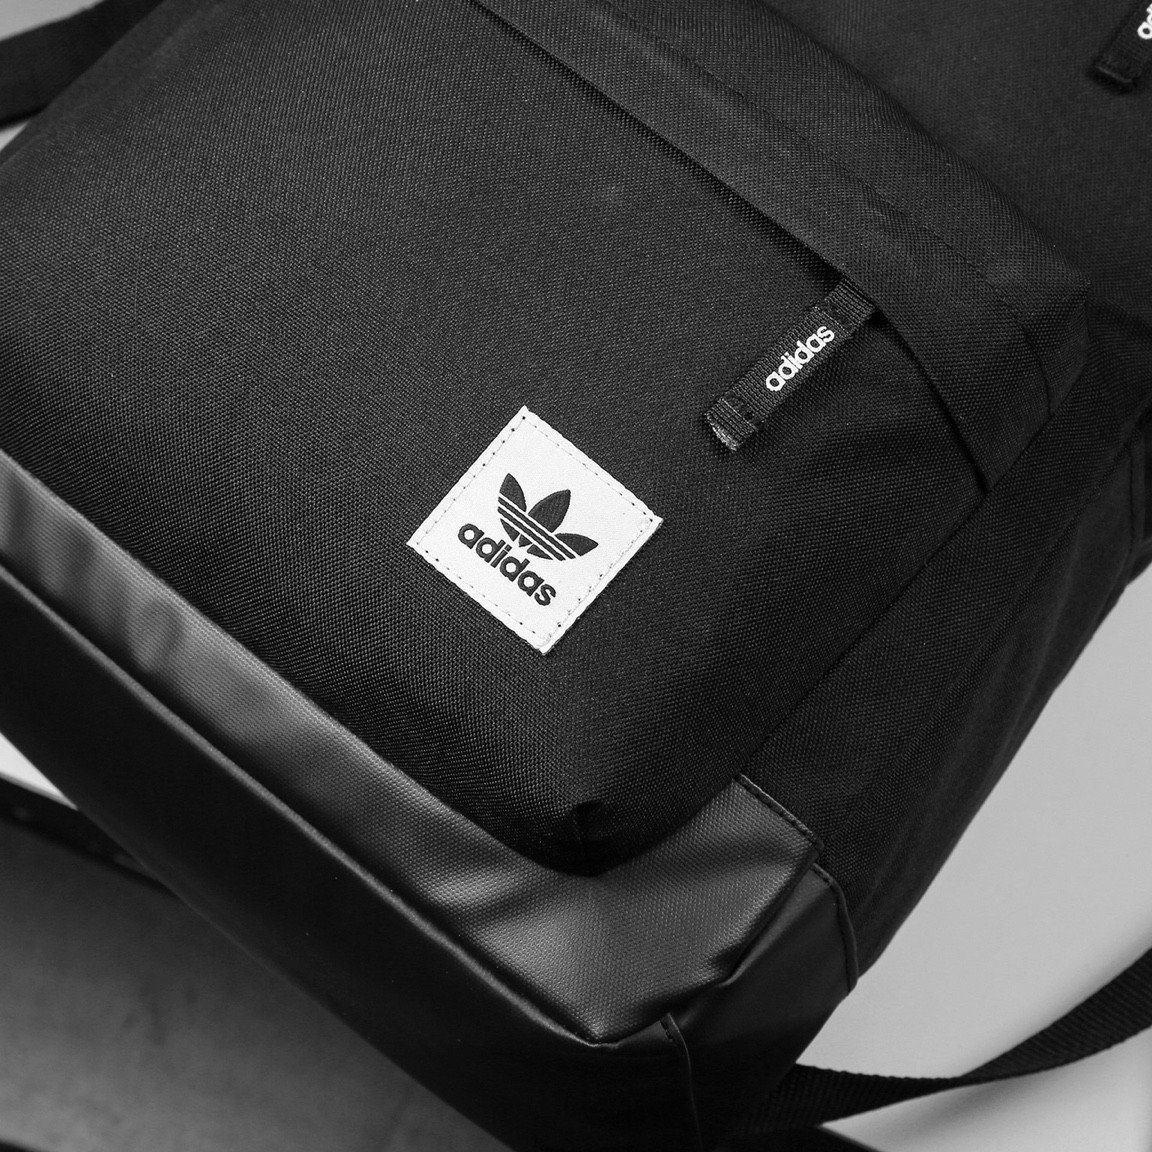 BALO THỂ THAO ADIDAS BACKPACK 9